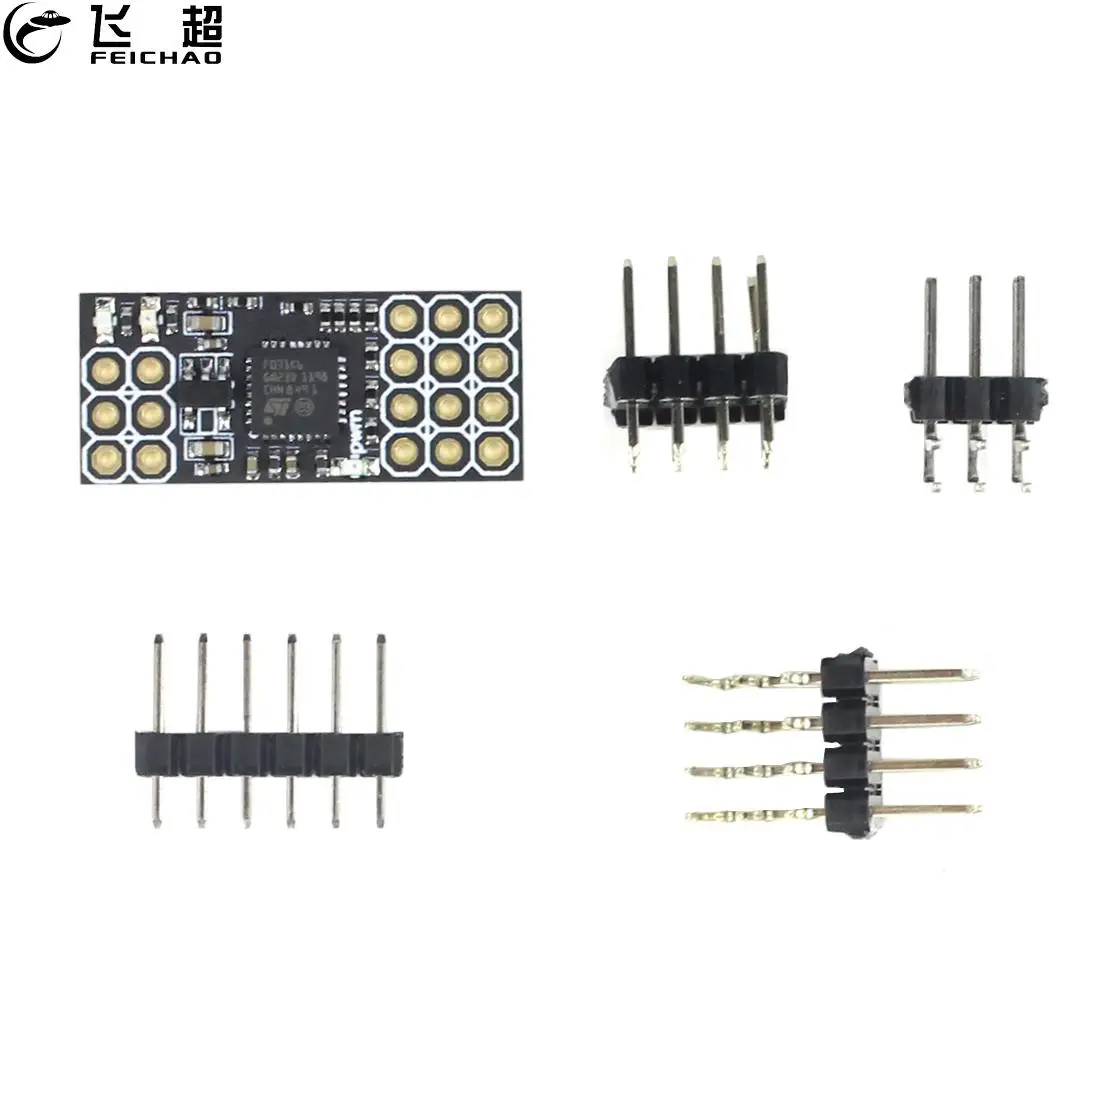 

Feichao SPP-S SBUS PPM PWM Signal Conversion Module Receiver Converter Support 8ch Input Output 3.3-20V for RC Drone Helicopter